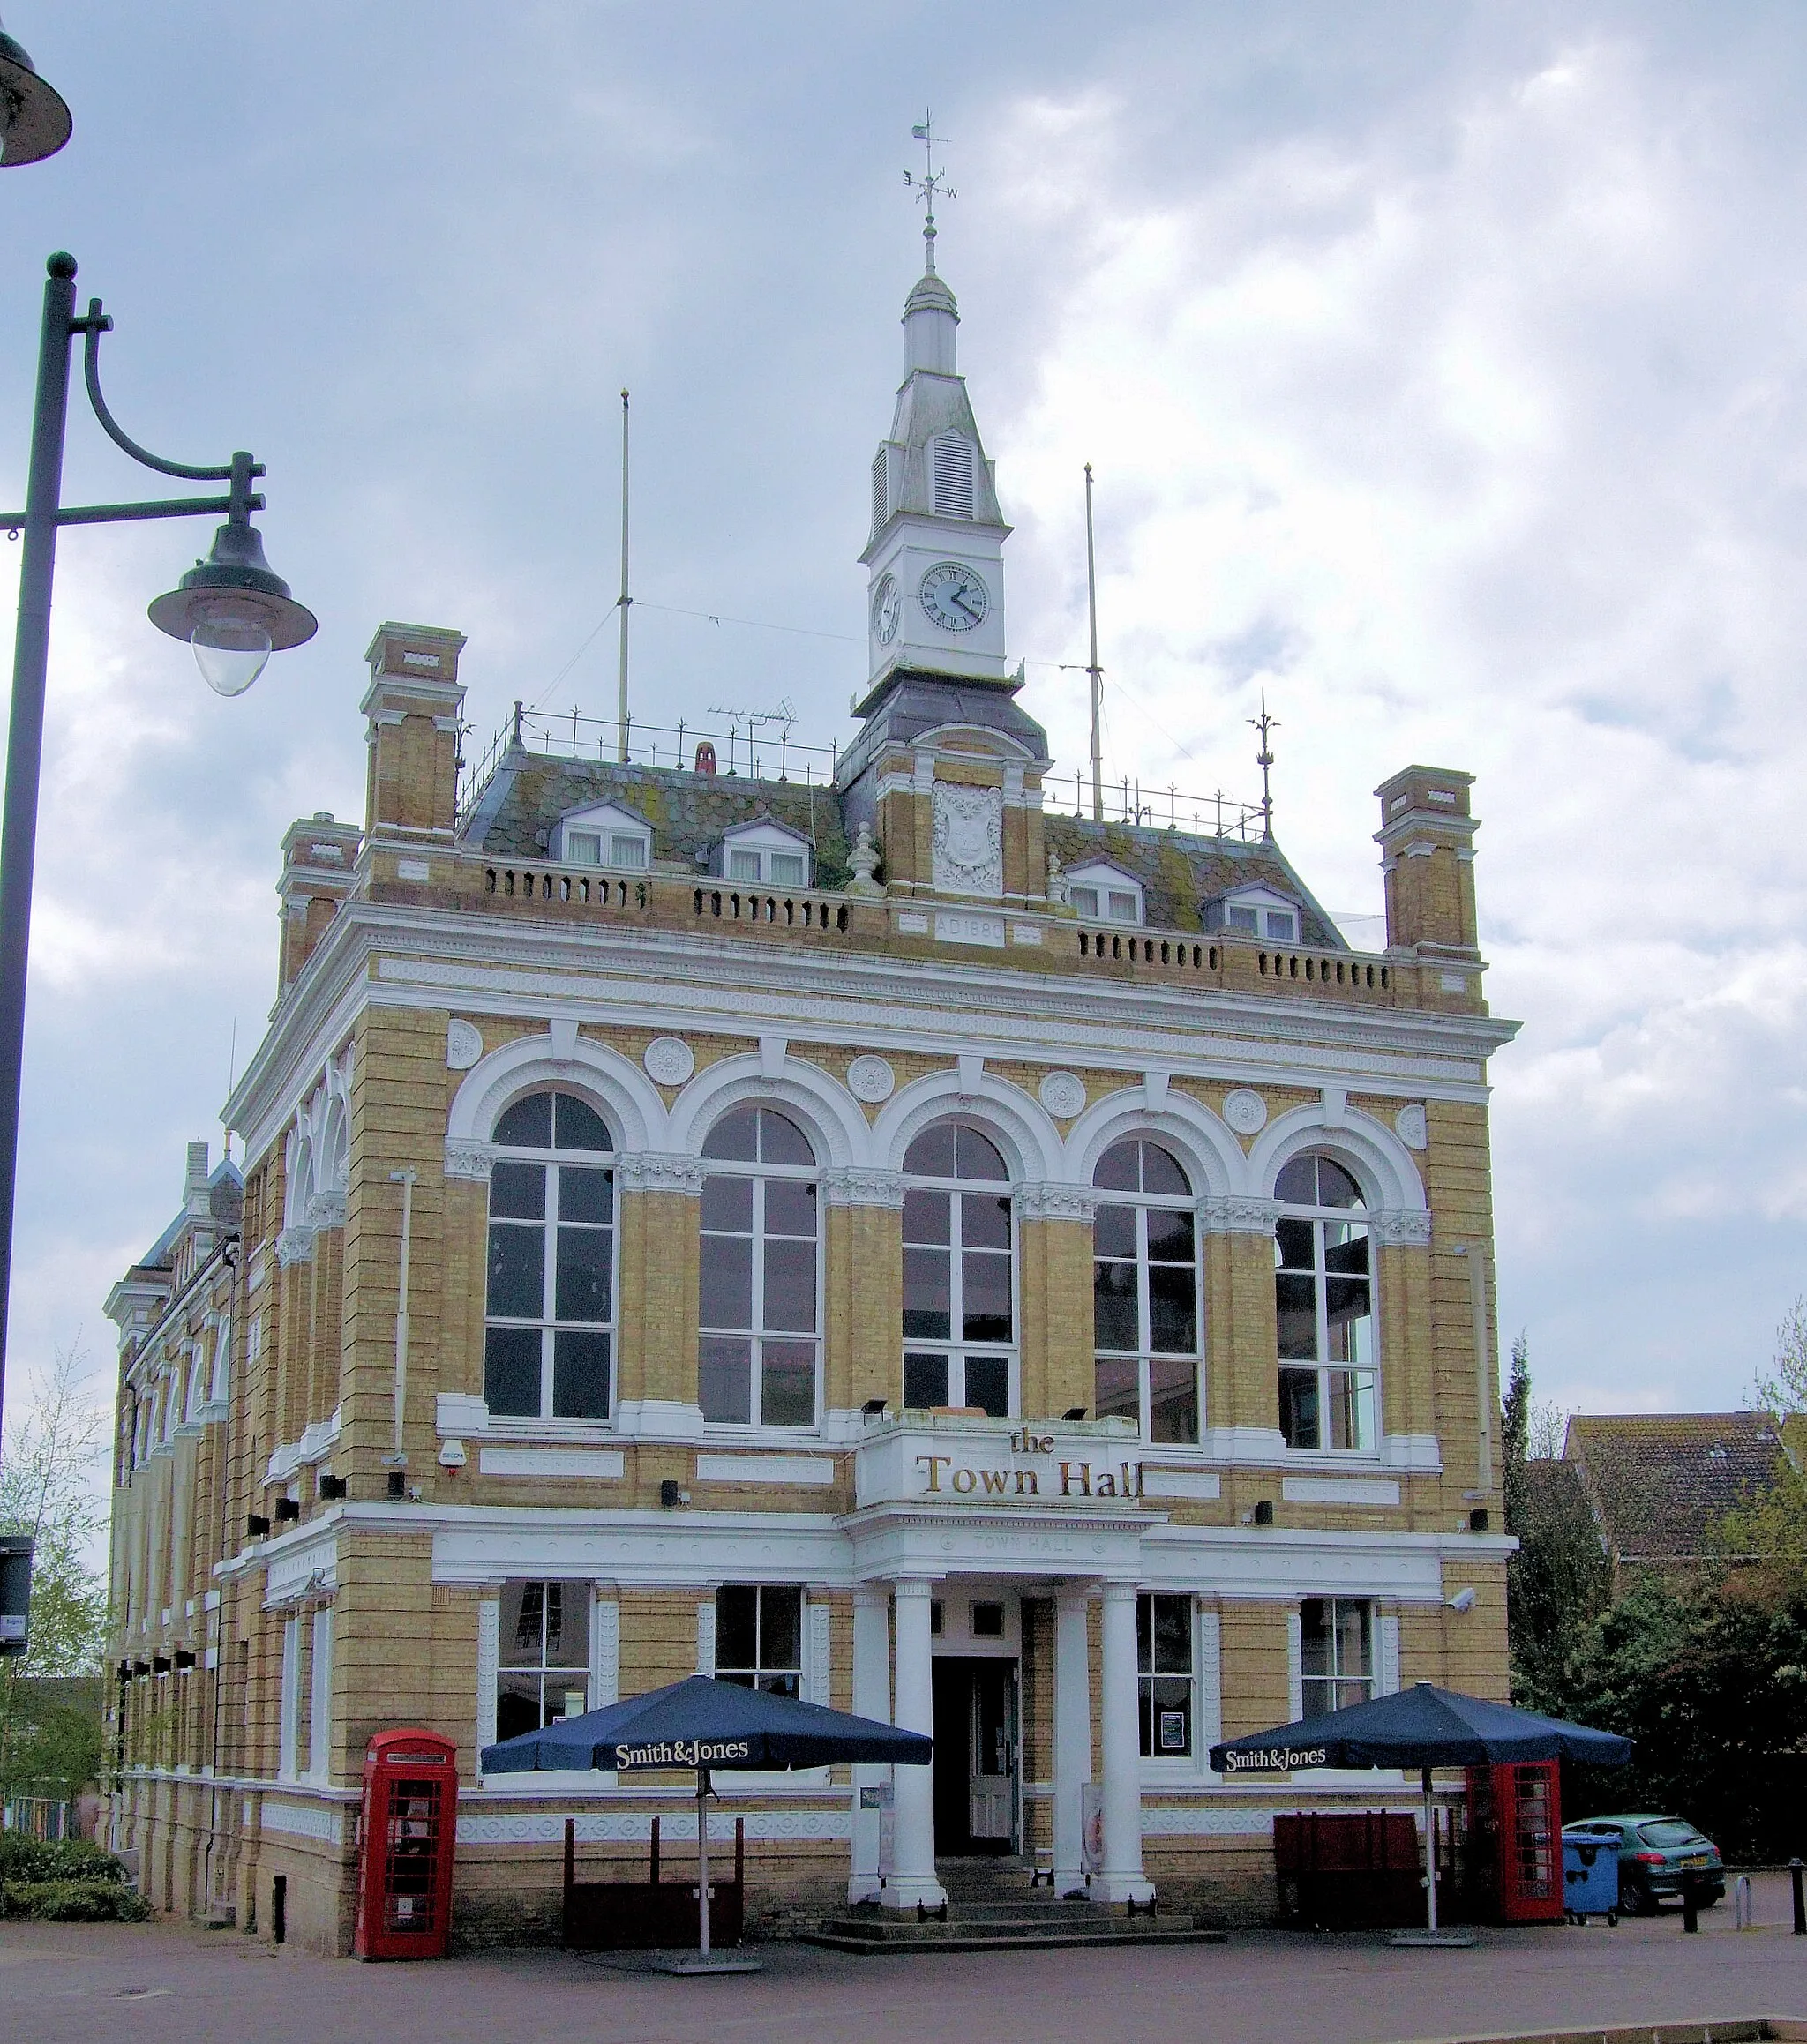 Photo showing: Staines Old Town Hall, Surrey.
The building was restored and opened in 1994 as a theatre and function room. It was used in the film Gandhi to represent the courtroom, where Judge Broomfield (Trevor Howard) sentences Gandhi (Ben Kingsley) to six years imprisonment for sedition. The building has since been seen in Ali G Indahouse.